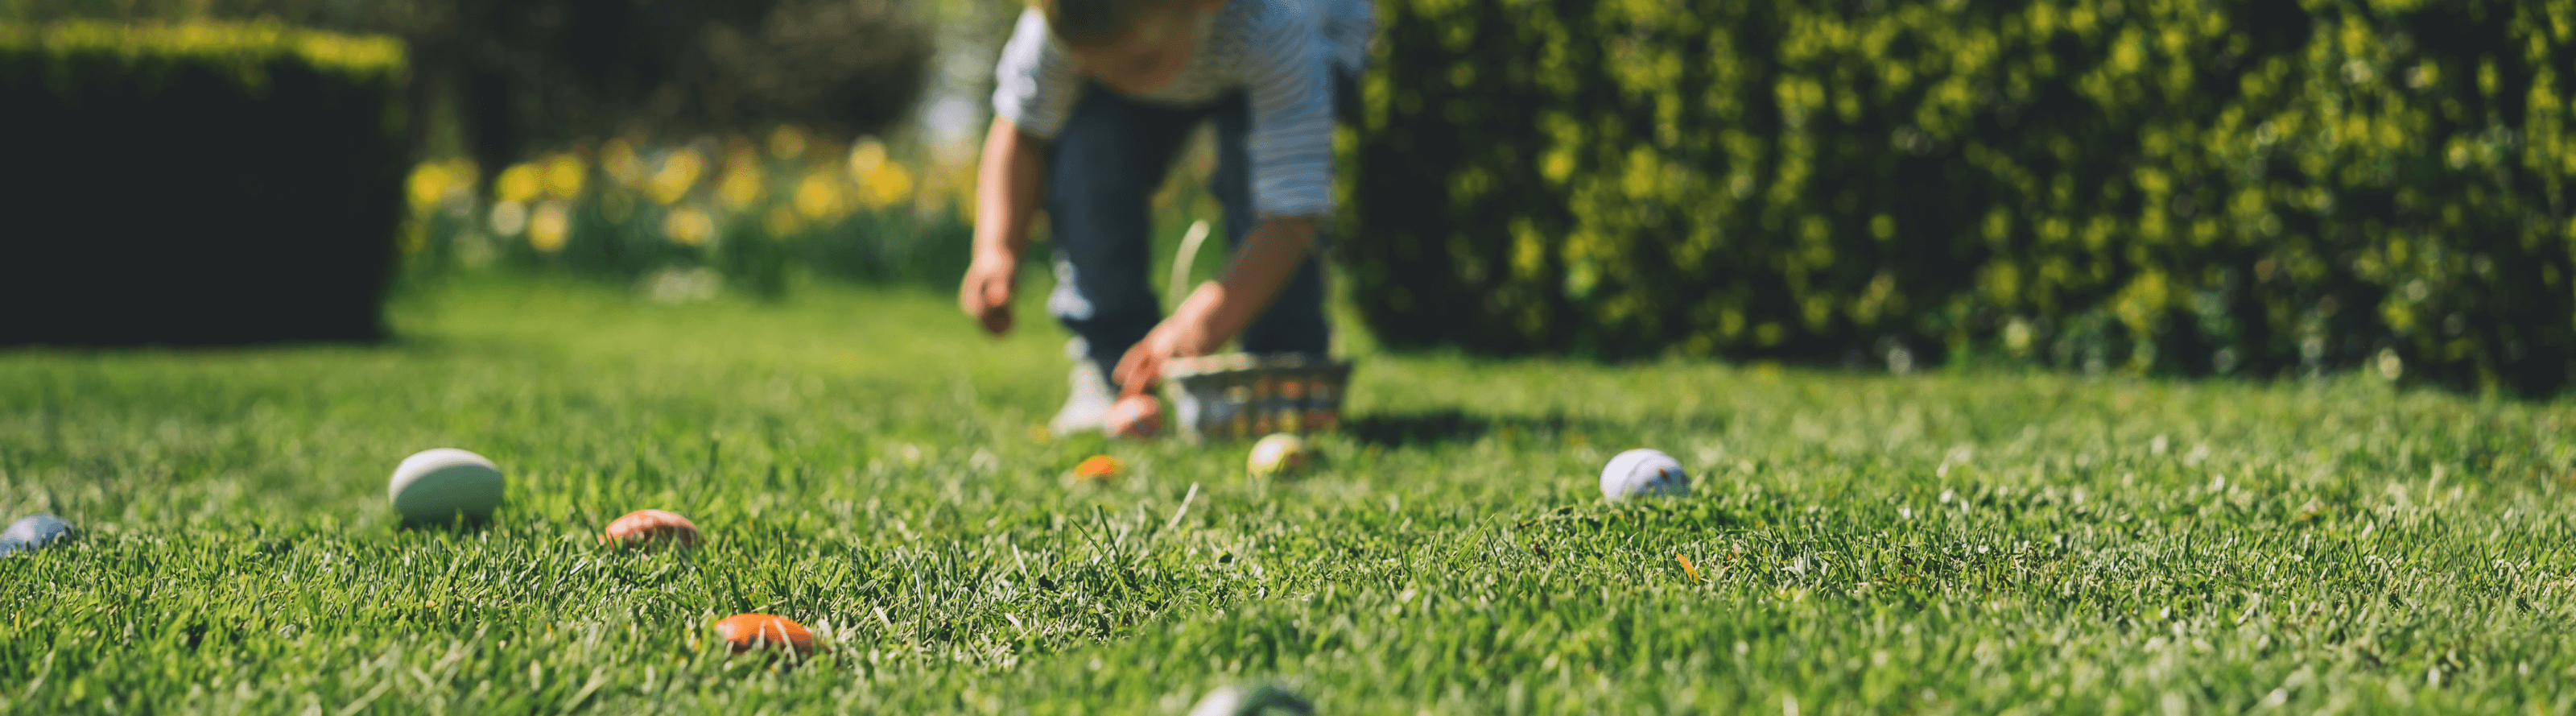 Best family activities this Easter